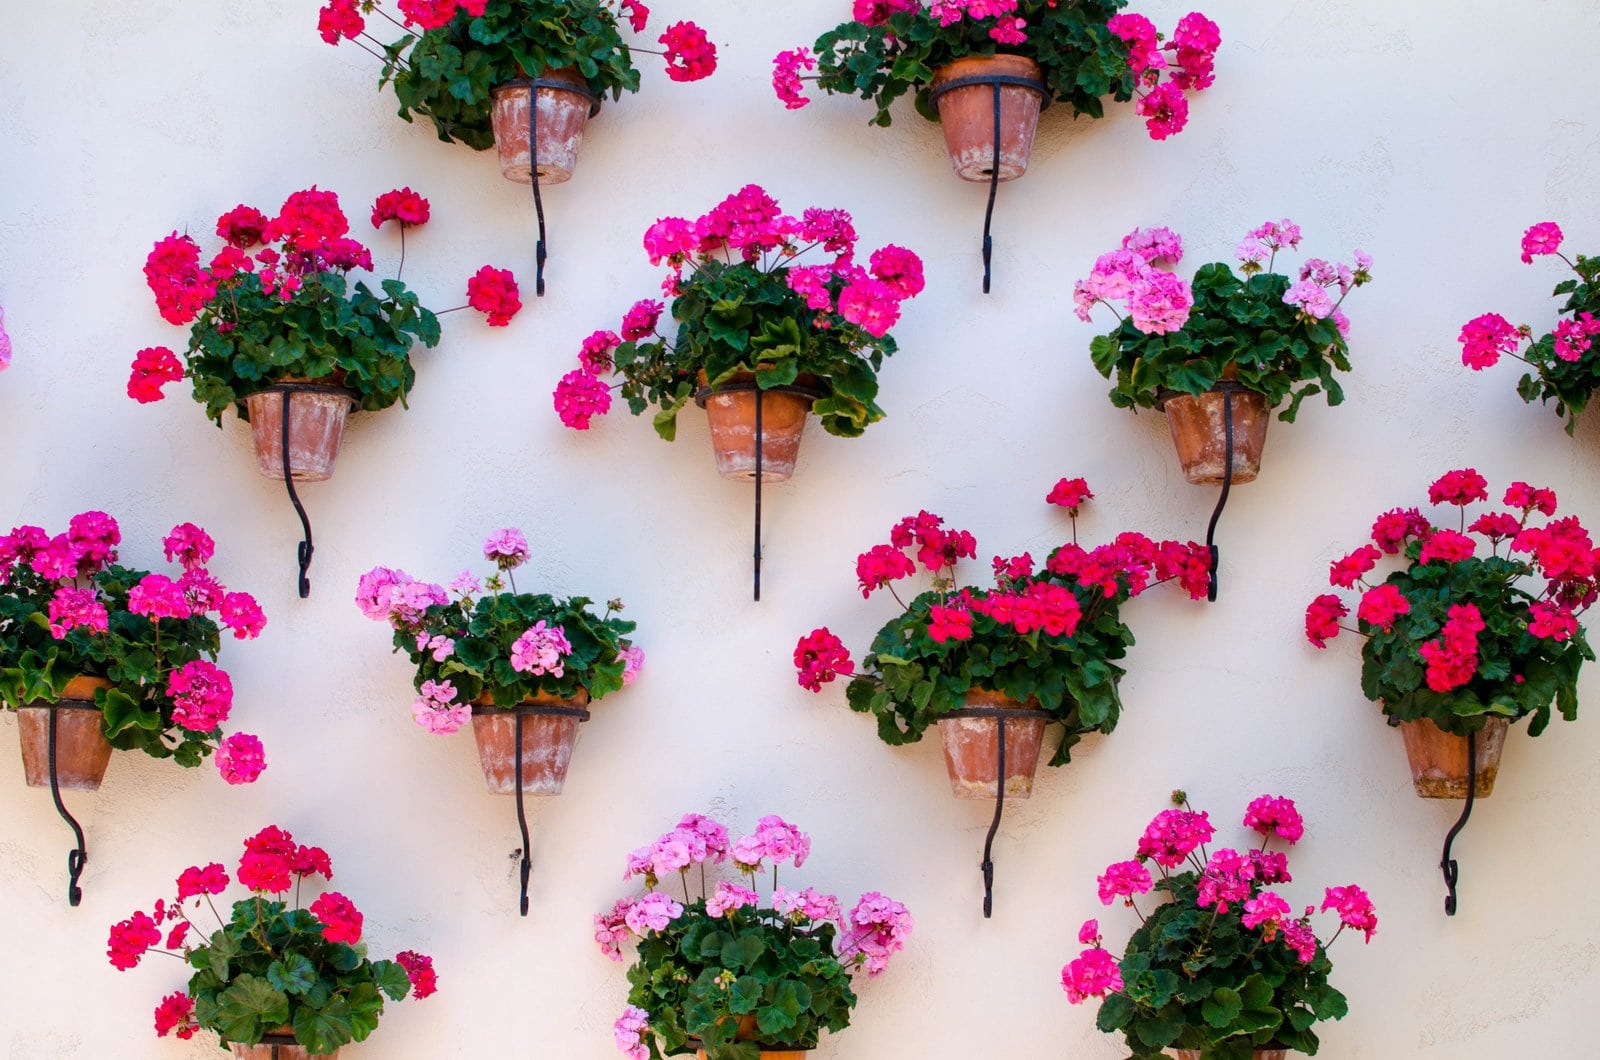 Indoor plants decorating: White wall with many blooming pink flowerpots